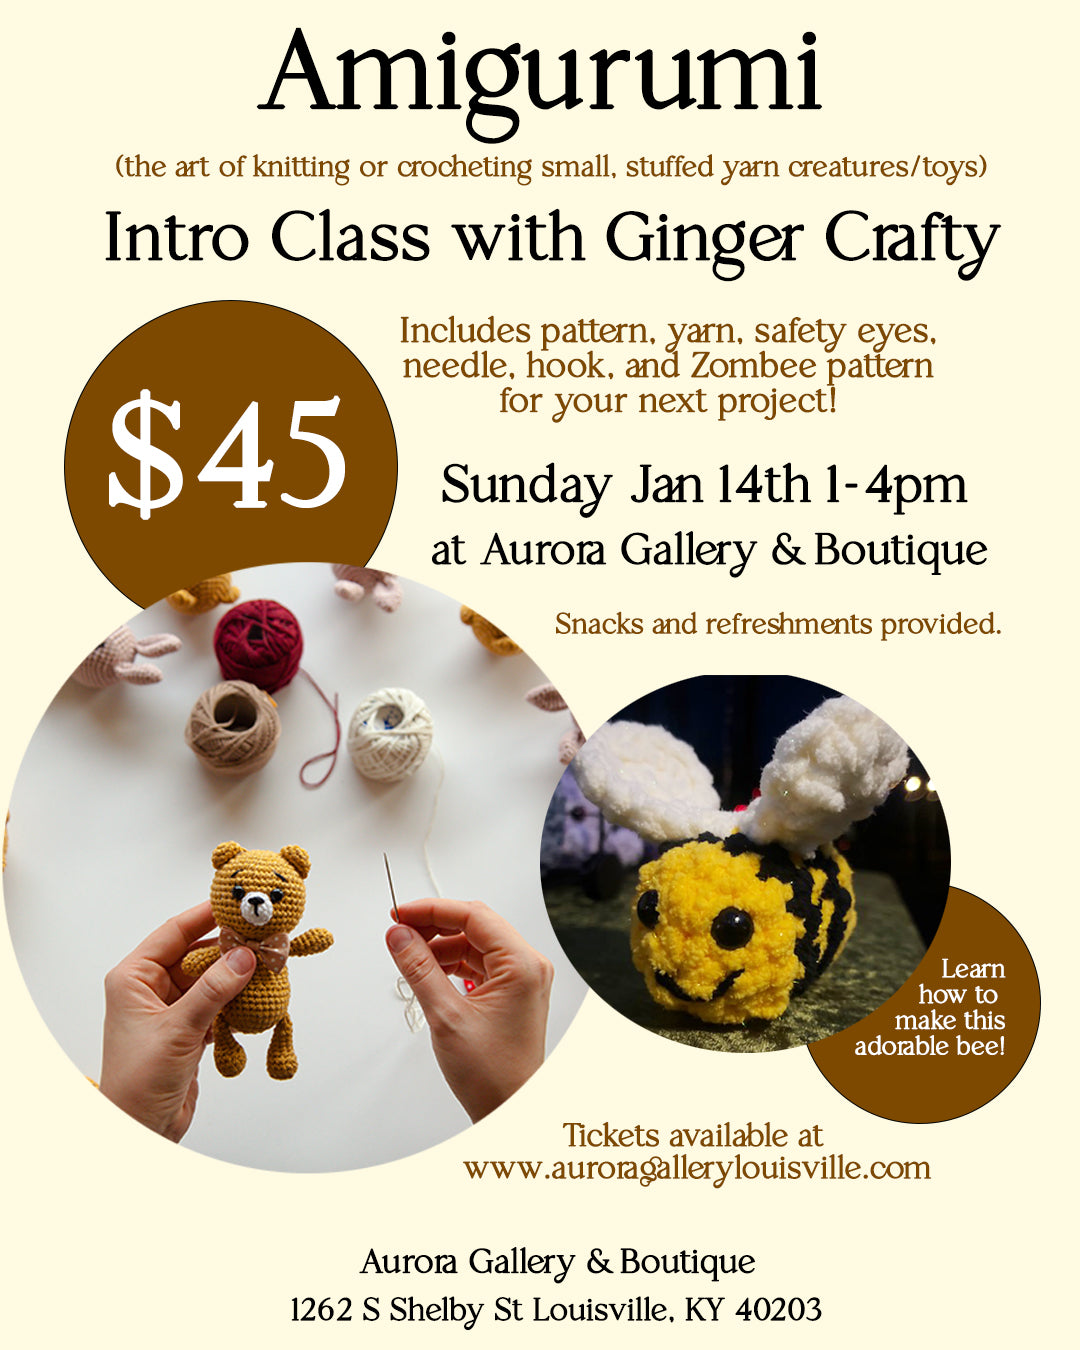 Intro to Amigurumi Class with Ginger Crafty